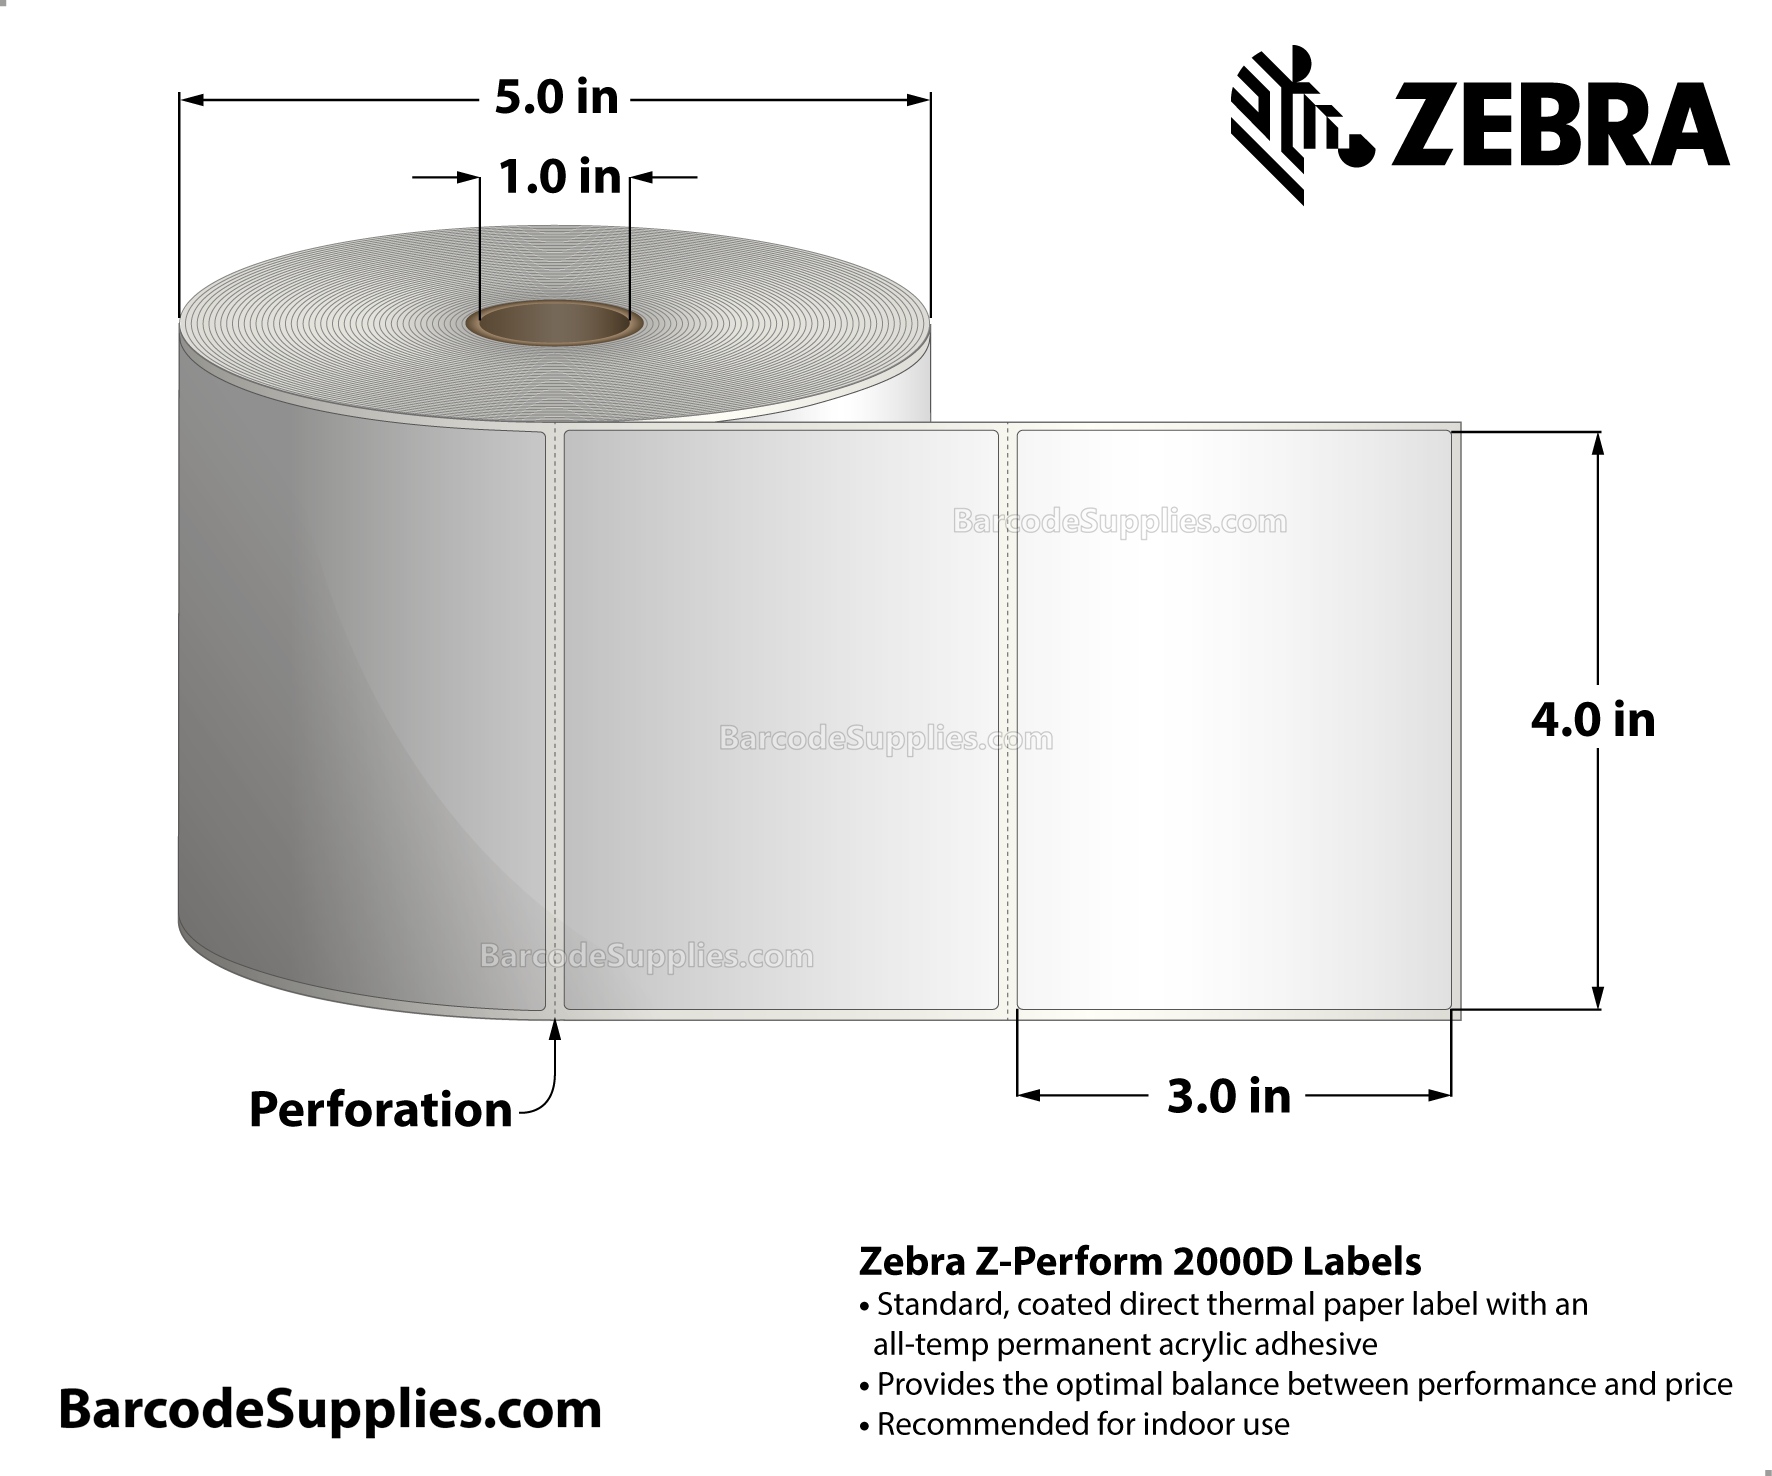 4 x 3 Direct Thermal White Z-Perform 2000D Labels With All-Temp Adhesive - Perforated - 840 Labels Per Roll - Carton Of 6 Rolls - 5040 Labels Total - MPN: 10010032